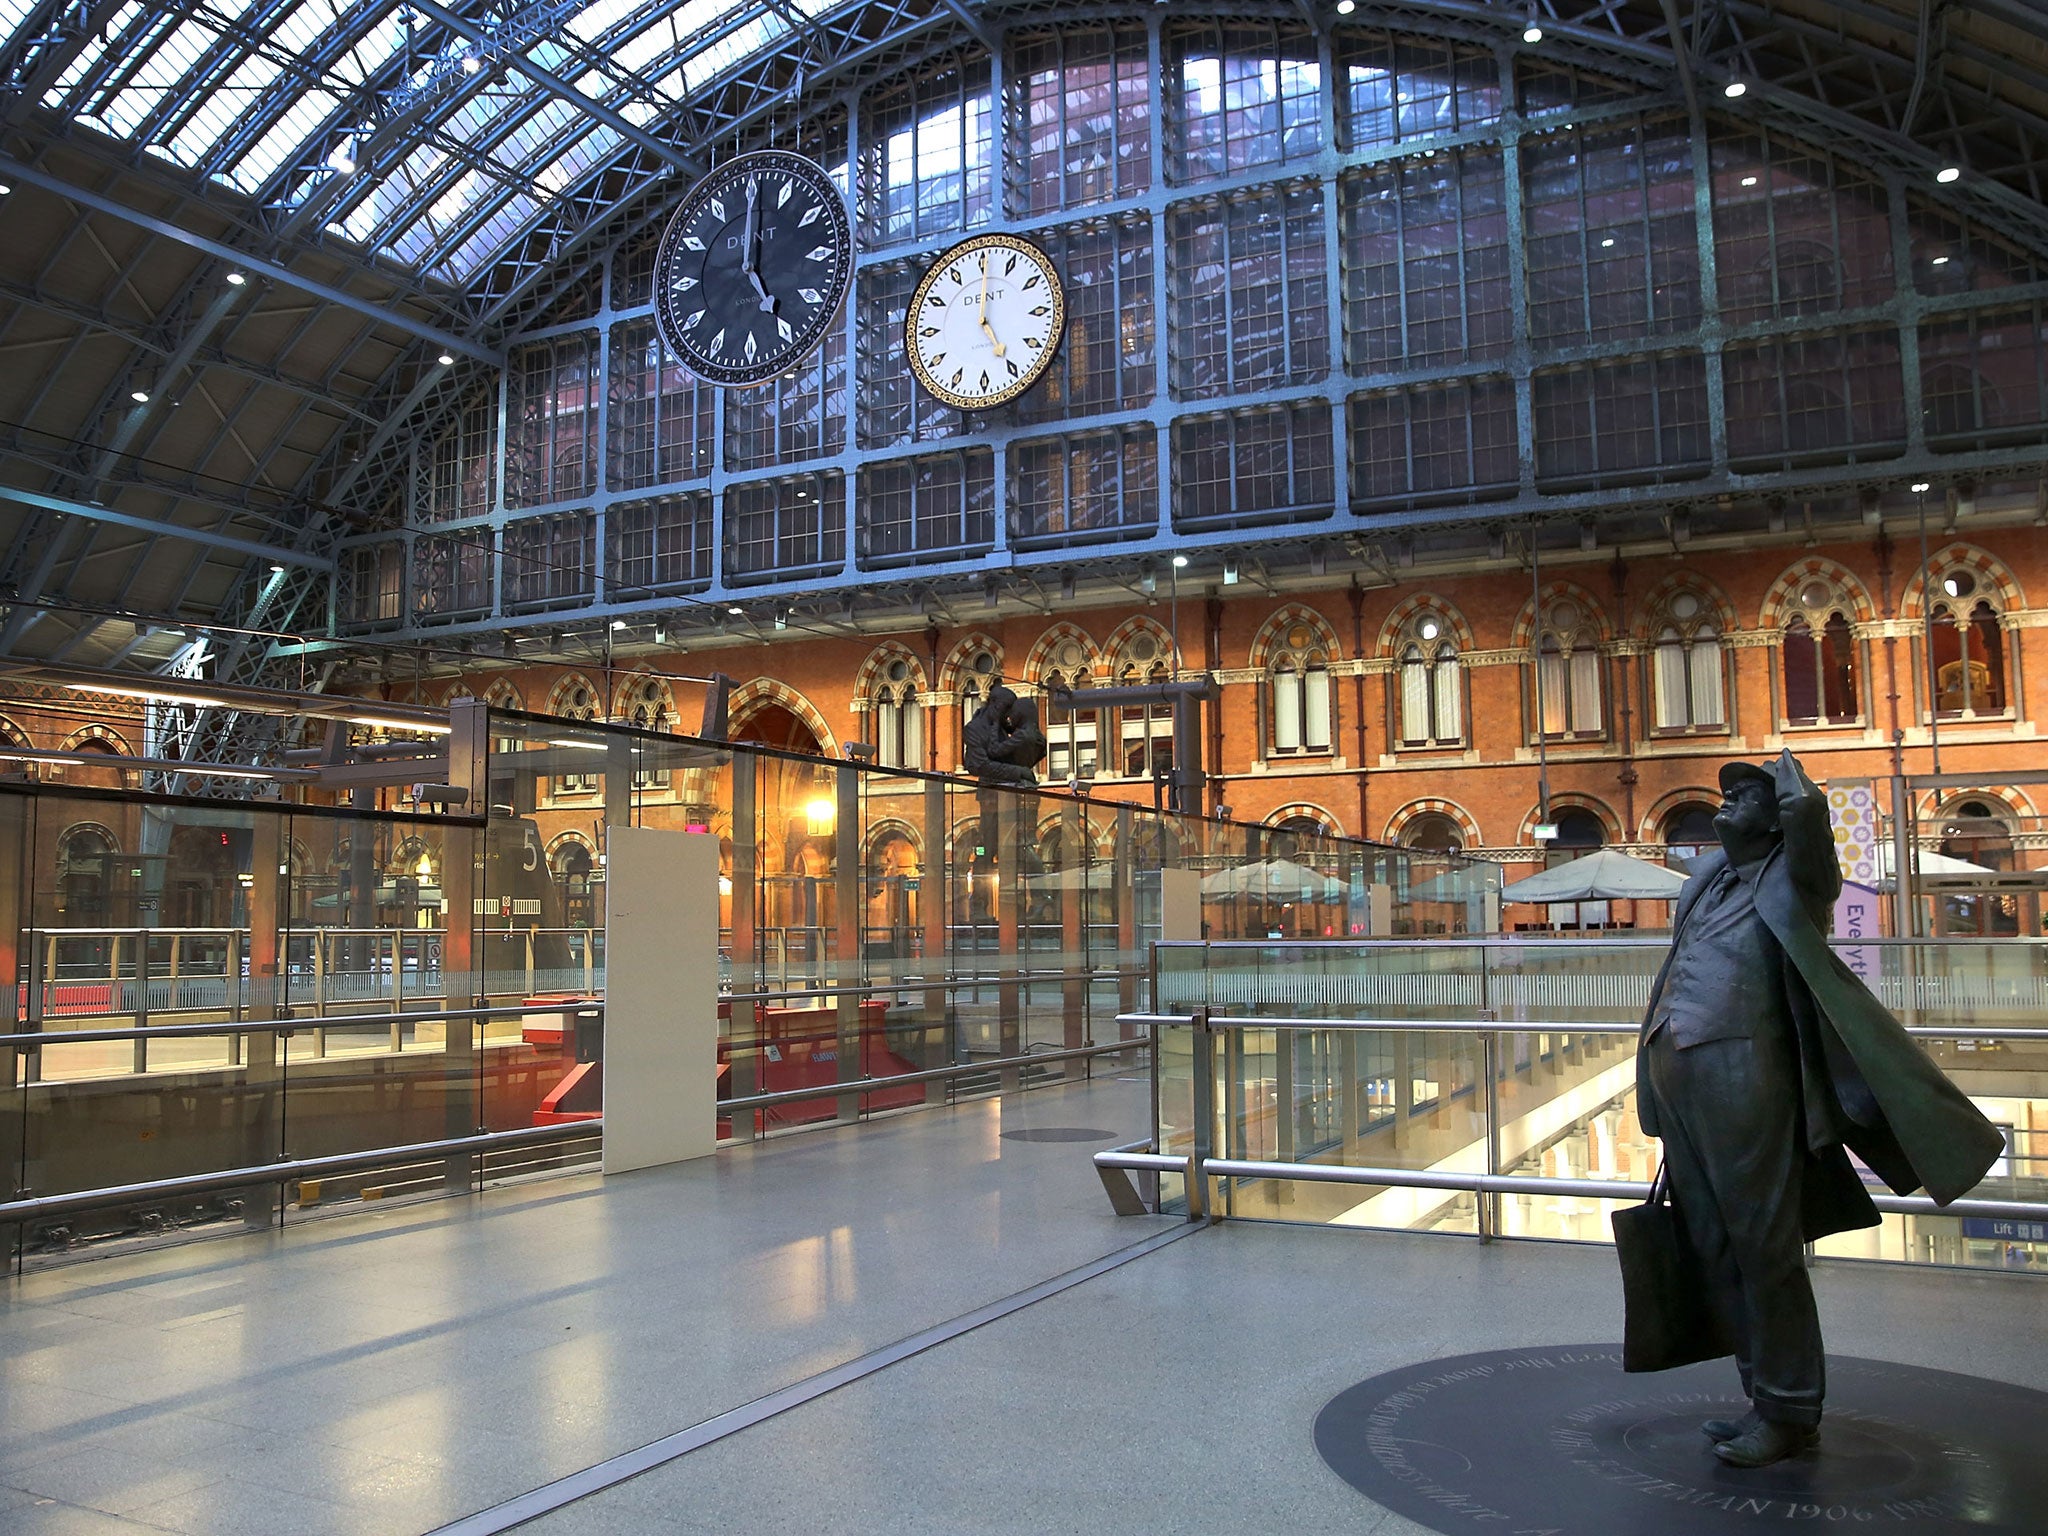 Cornelia Parker’s ‘One More Time’, the black-faced clock, is unveiled at St Pancras, with the Sir John Betjeman statue in the foreground and the derided lovers statue in the background